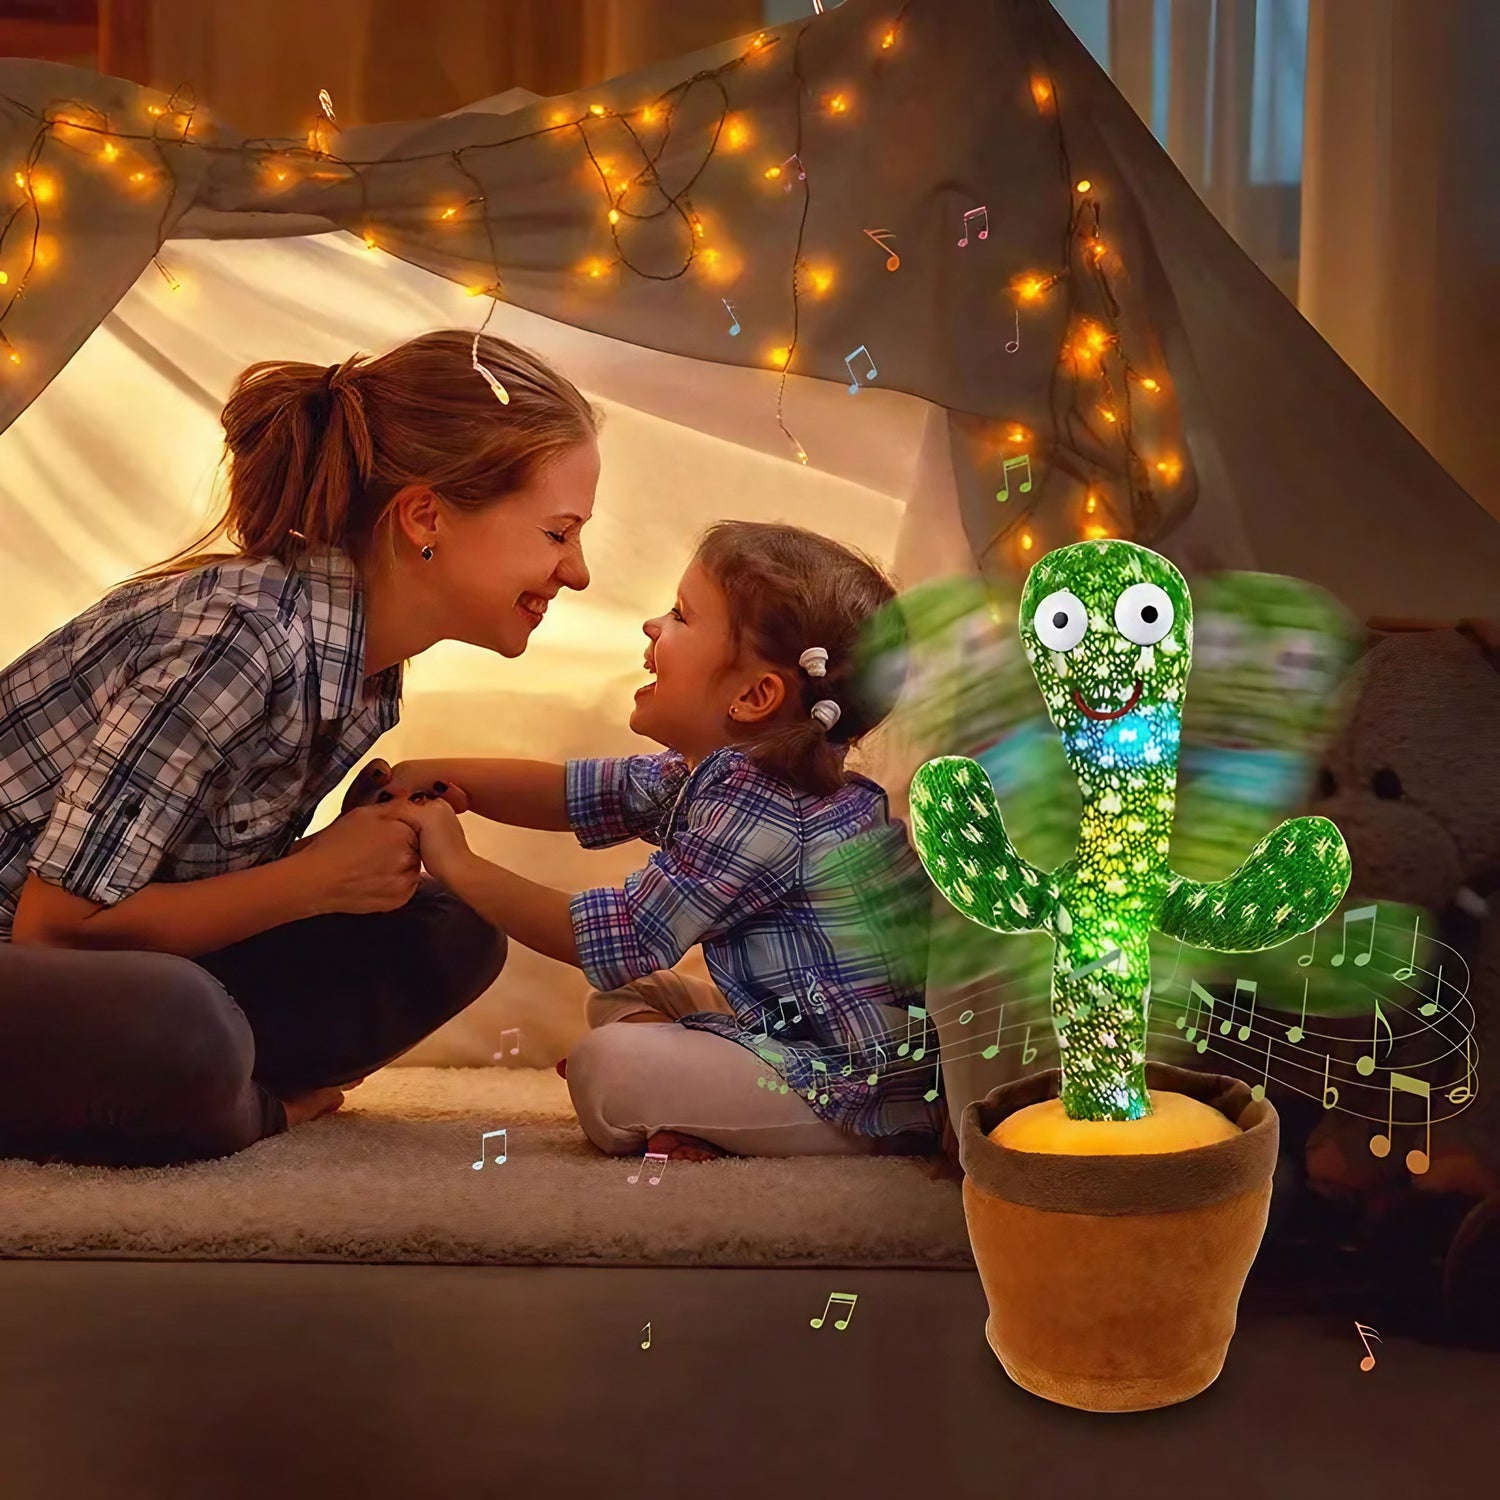 A woman and a young girl smiling at each other inside a cozy blanket fort lit by string lights, with an Original Dancing Cactus Toy from Soulful Trading nearby.